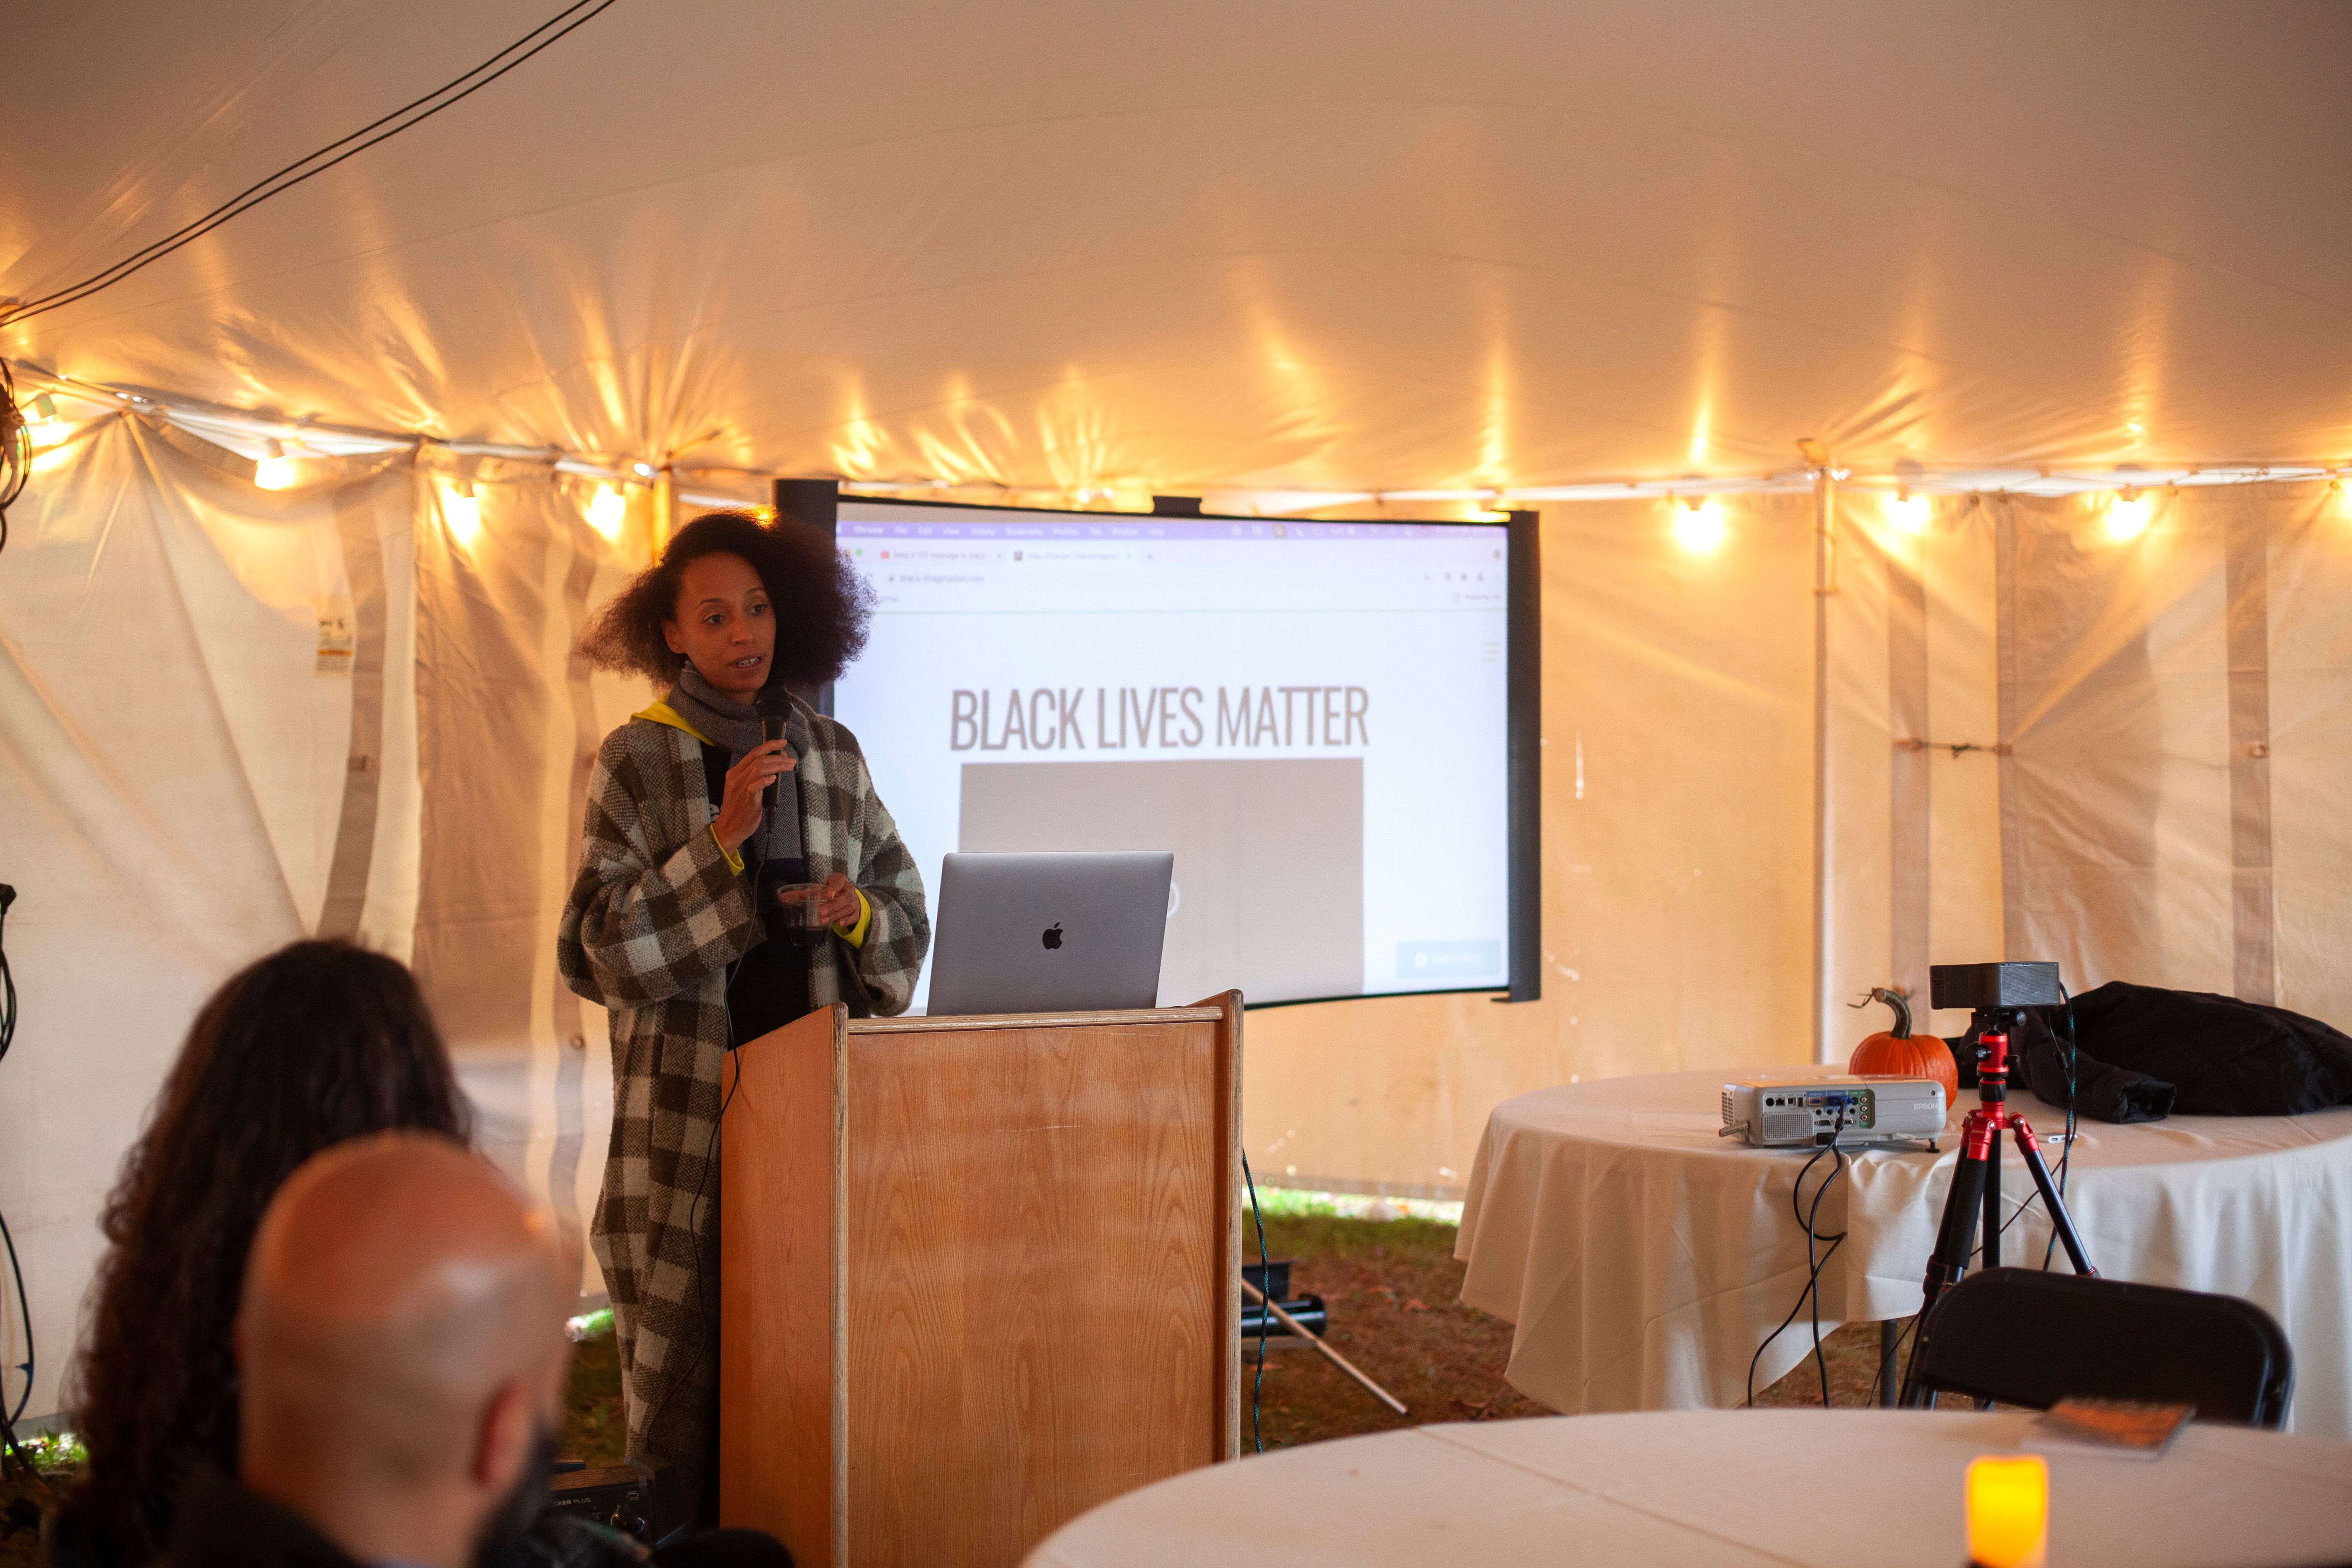 A presenter speaks at a podium in front of a powerpoint slide reading “Black Lives Matter”